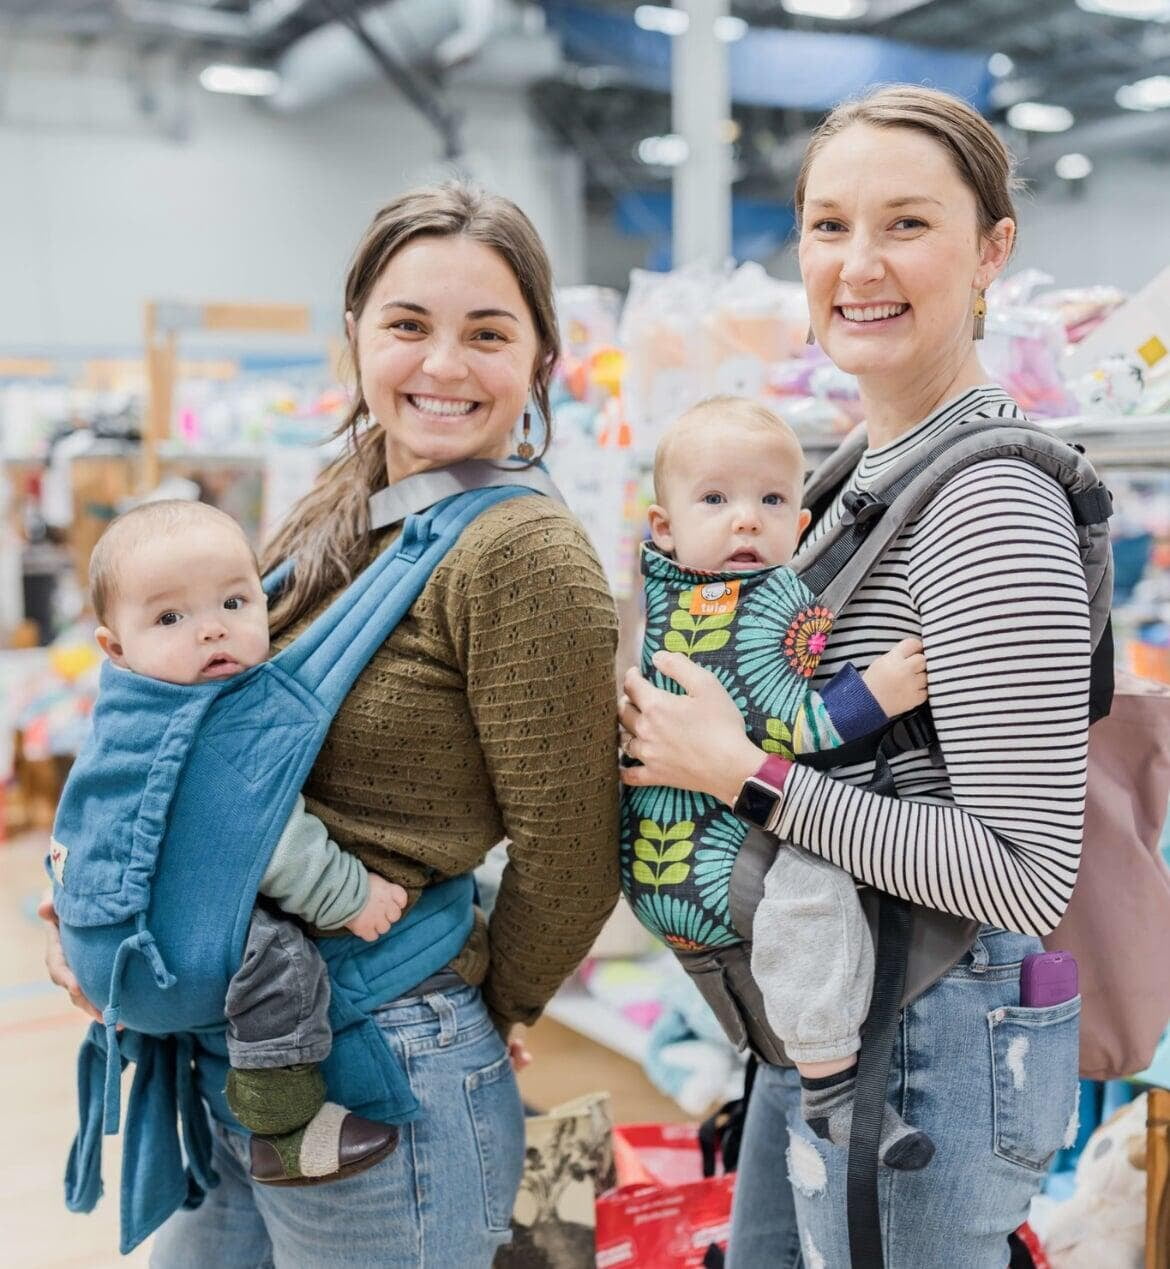 Two moms with babies in carriers shopping together